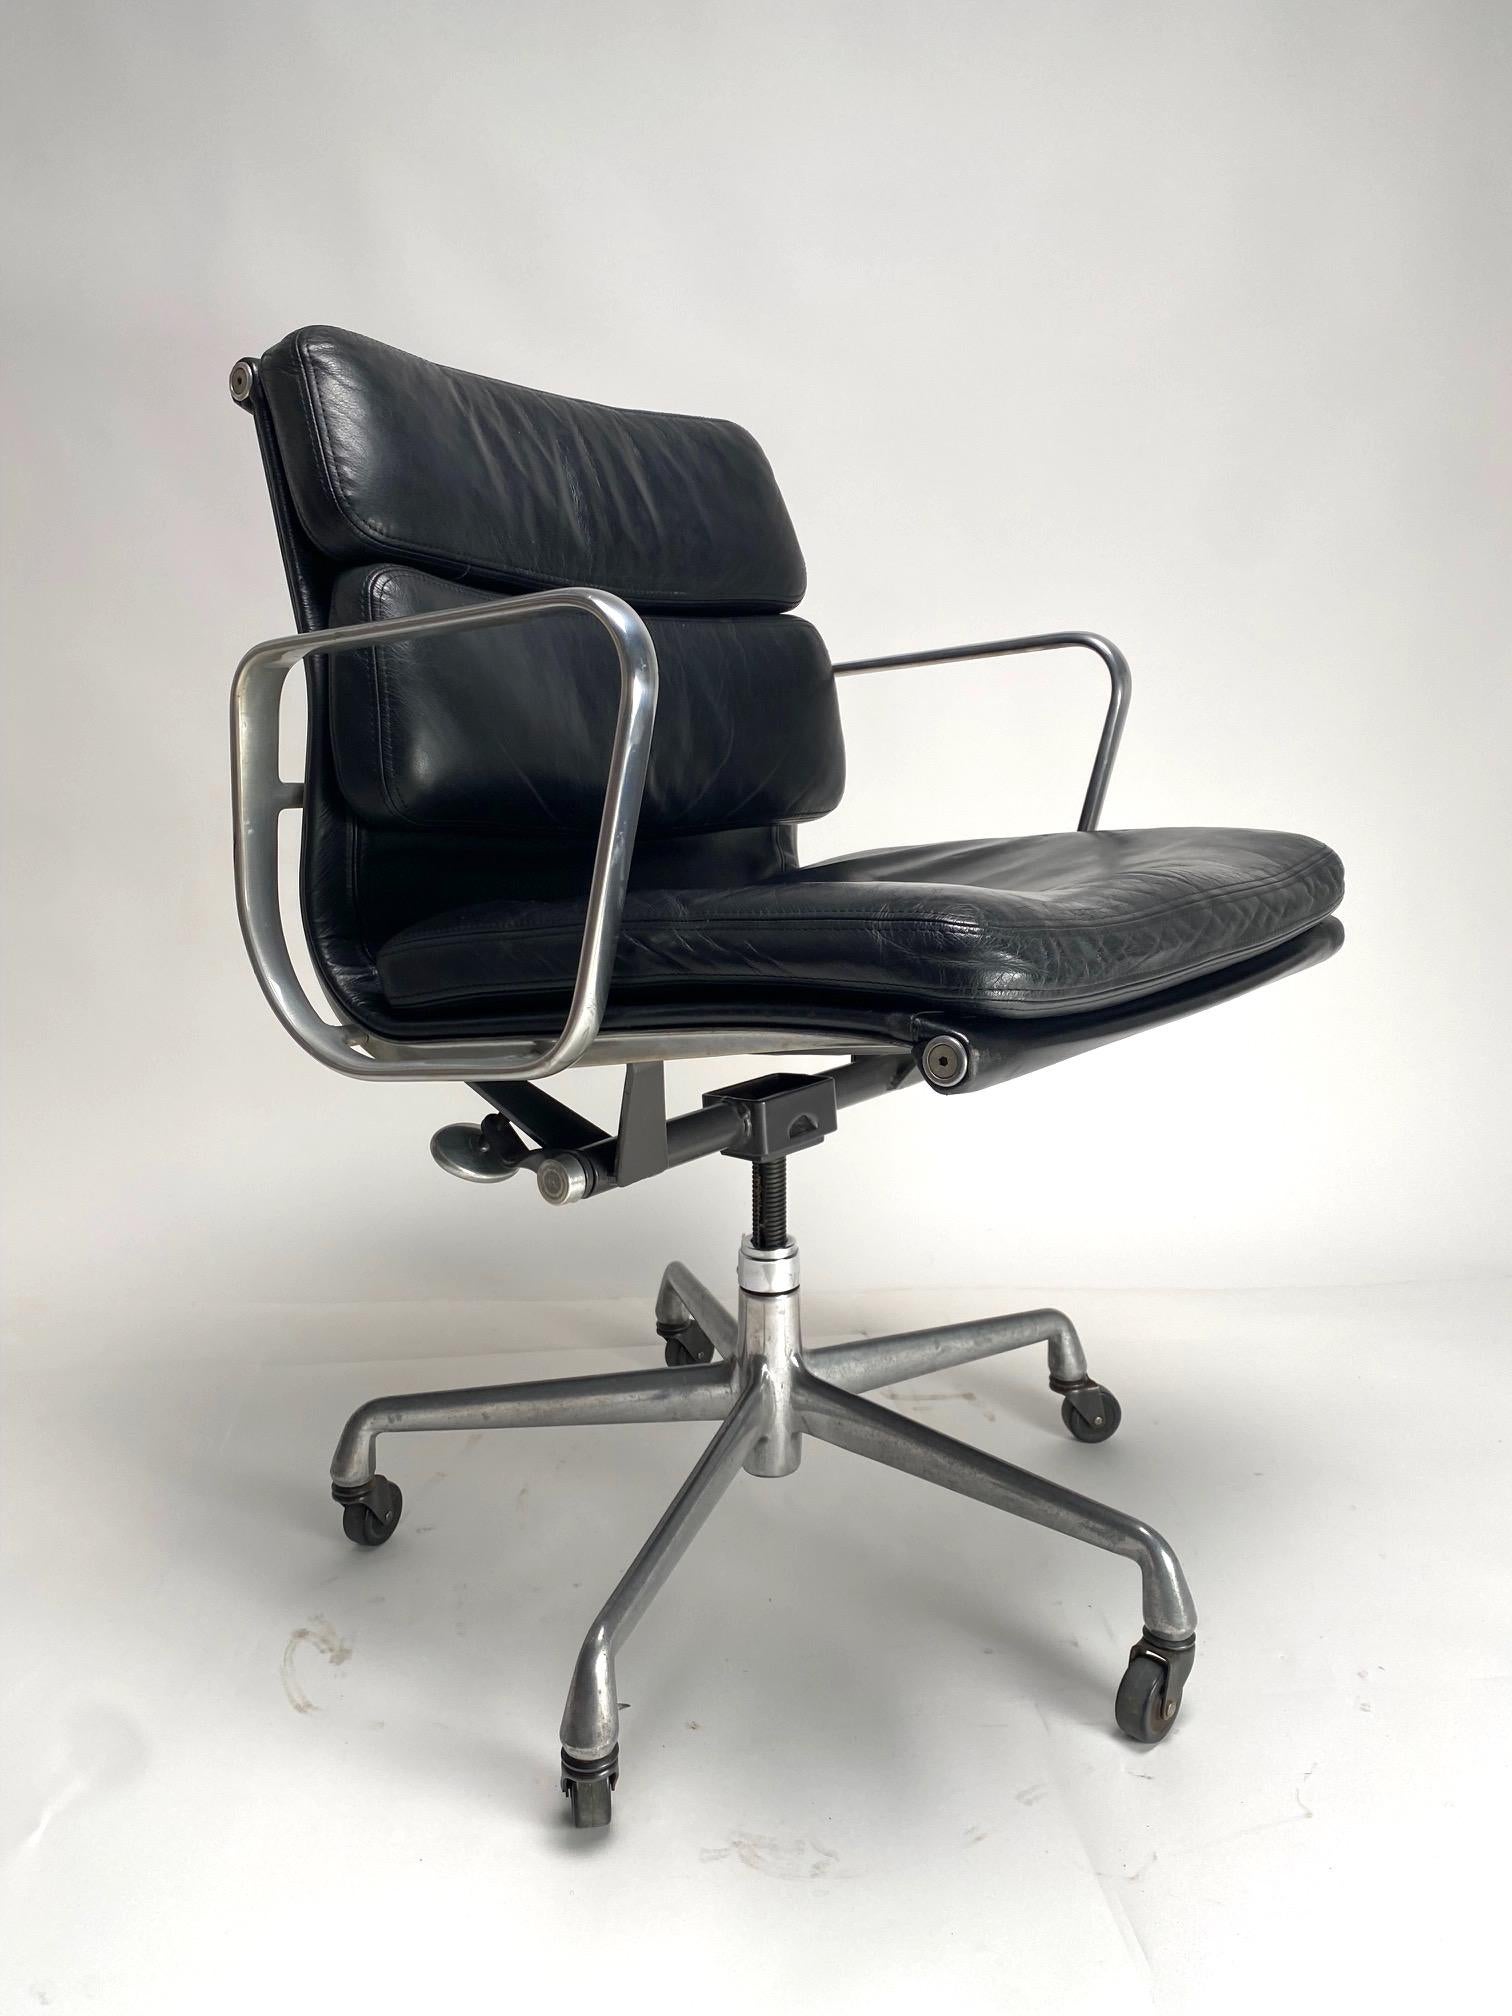 EA217 black Soft Pad Chair by Charles & Ray Eames for Herman miller, 1970s

Black leather chair with aluminium base and wheels. Swivels on itself and is height-adjustable.